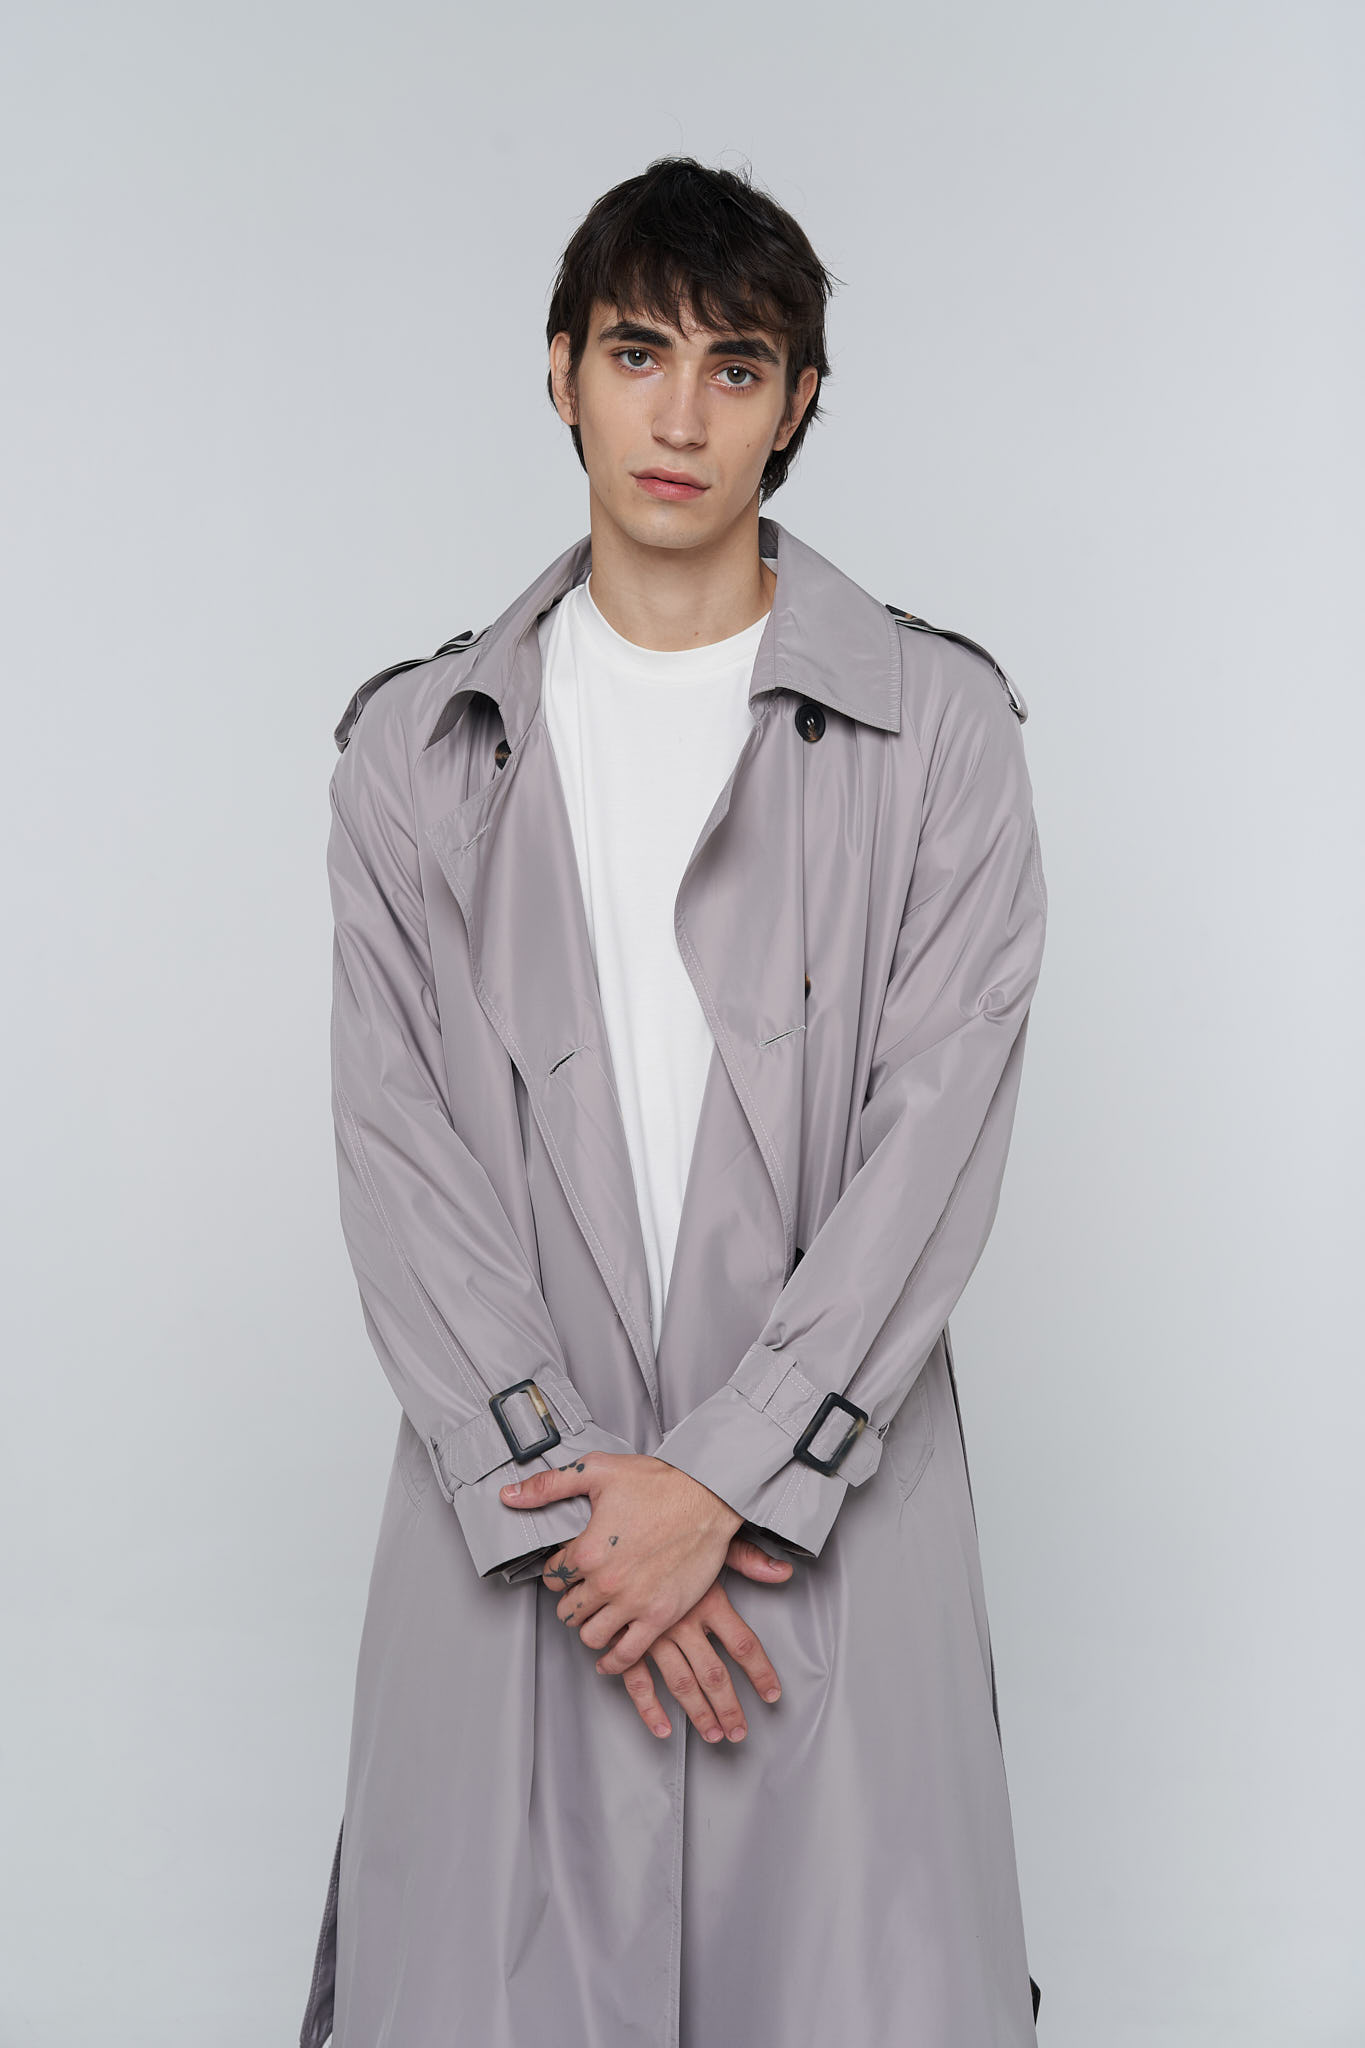 80s trench coat in gray color